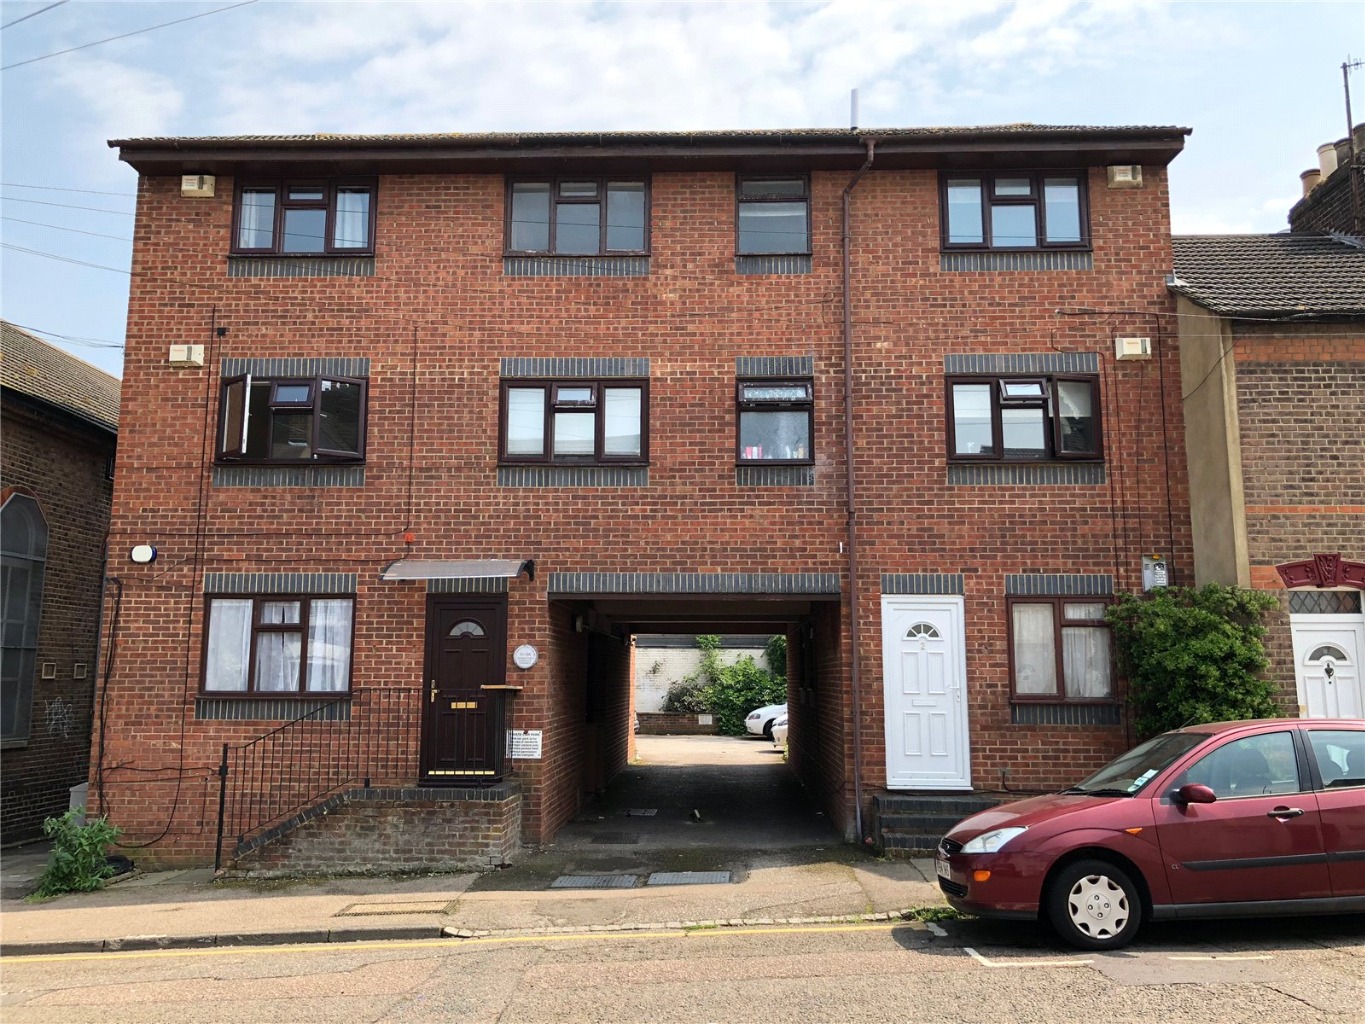 1 bed flat for sale in 33 Cardigan Street, Bedfordshire, LU1 